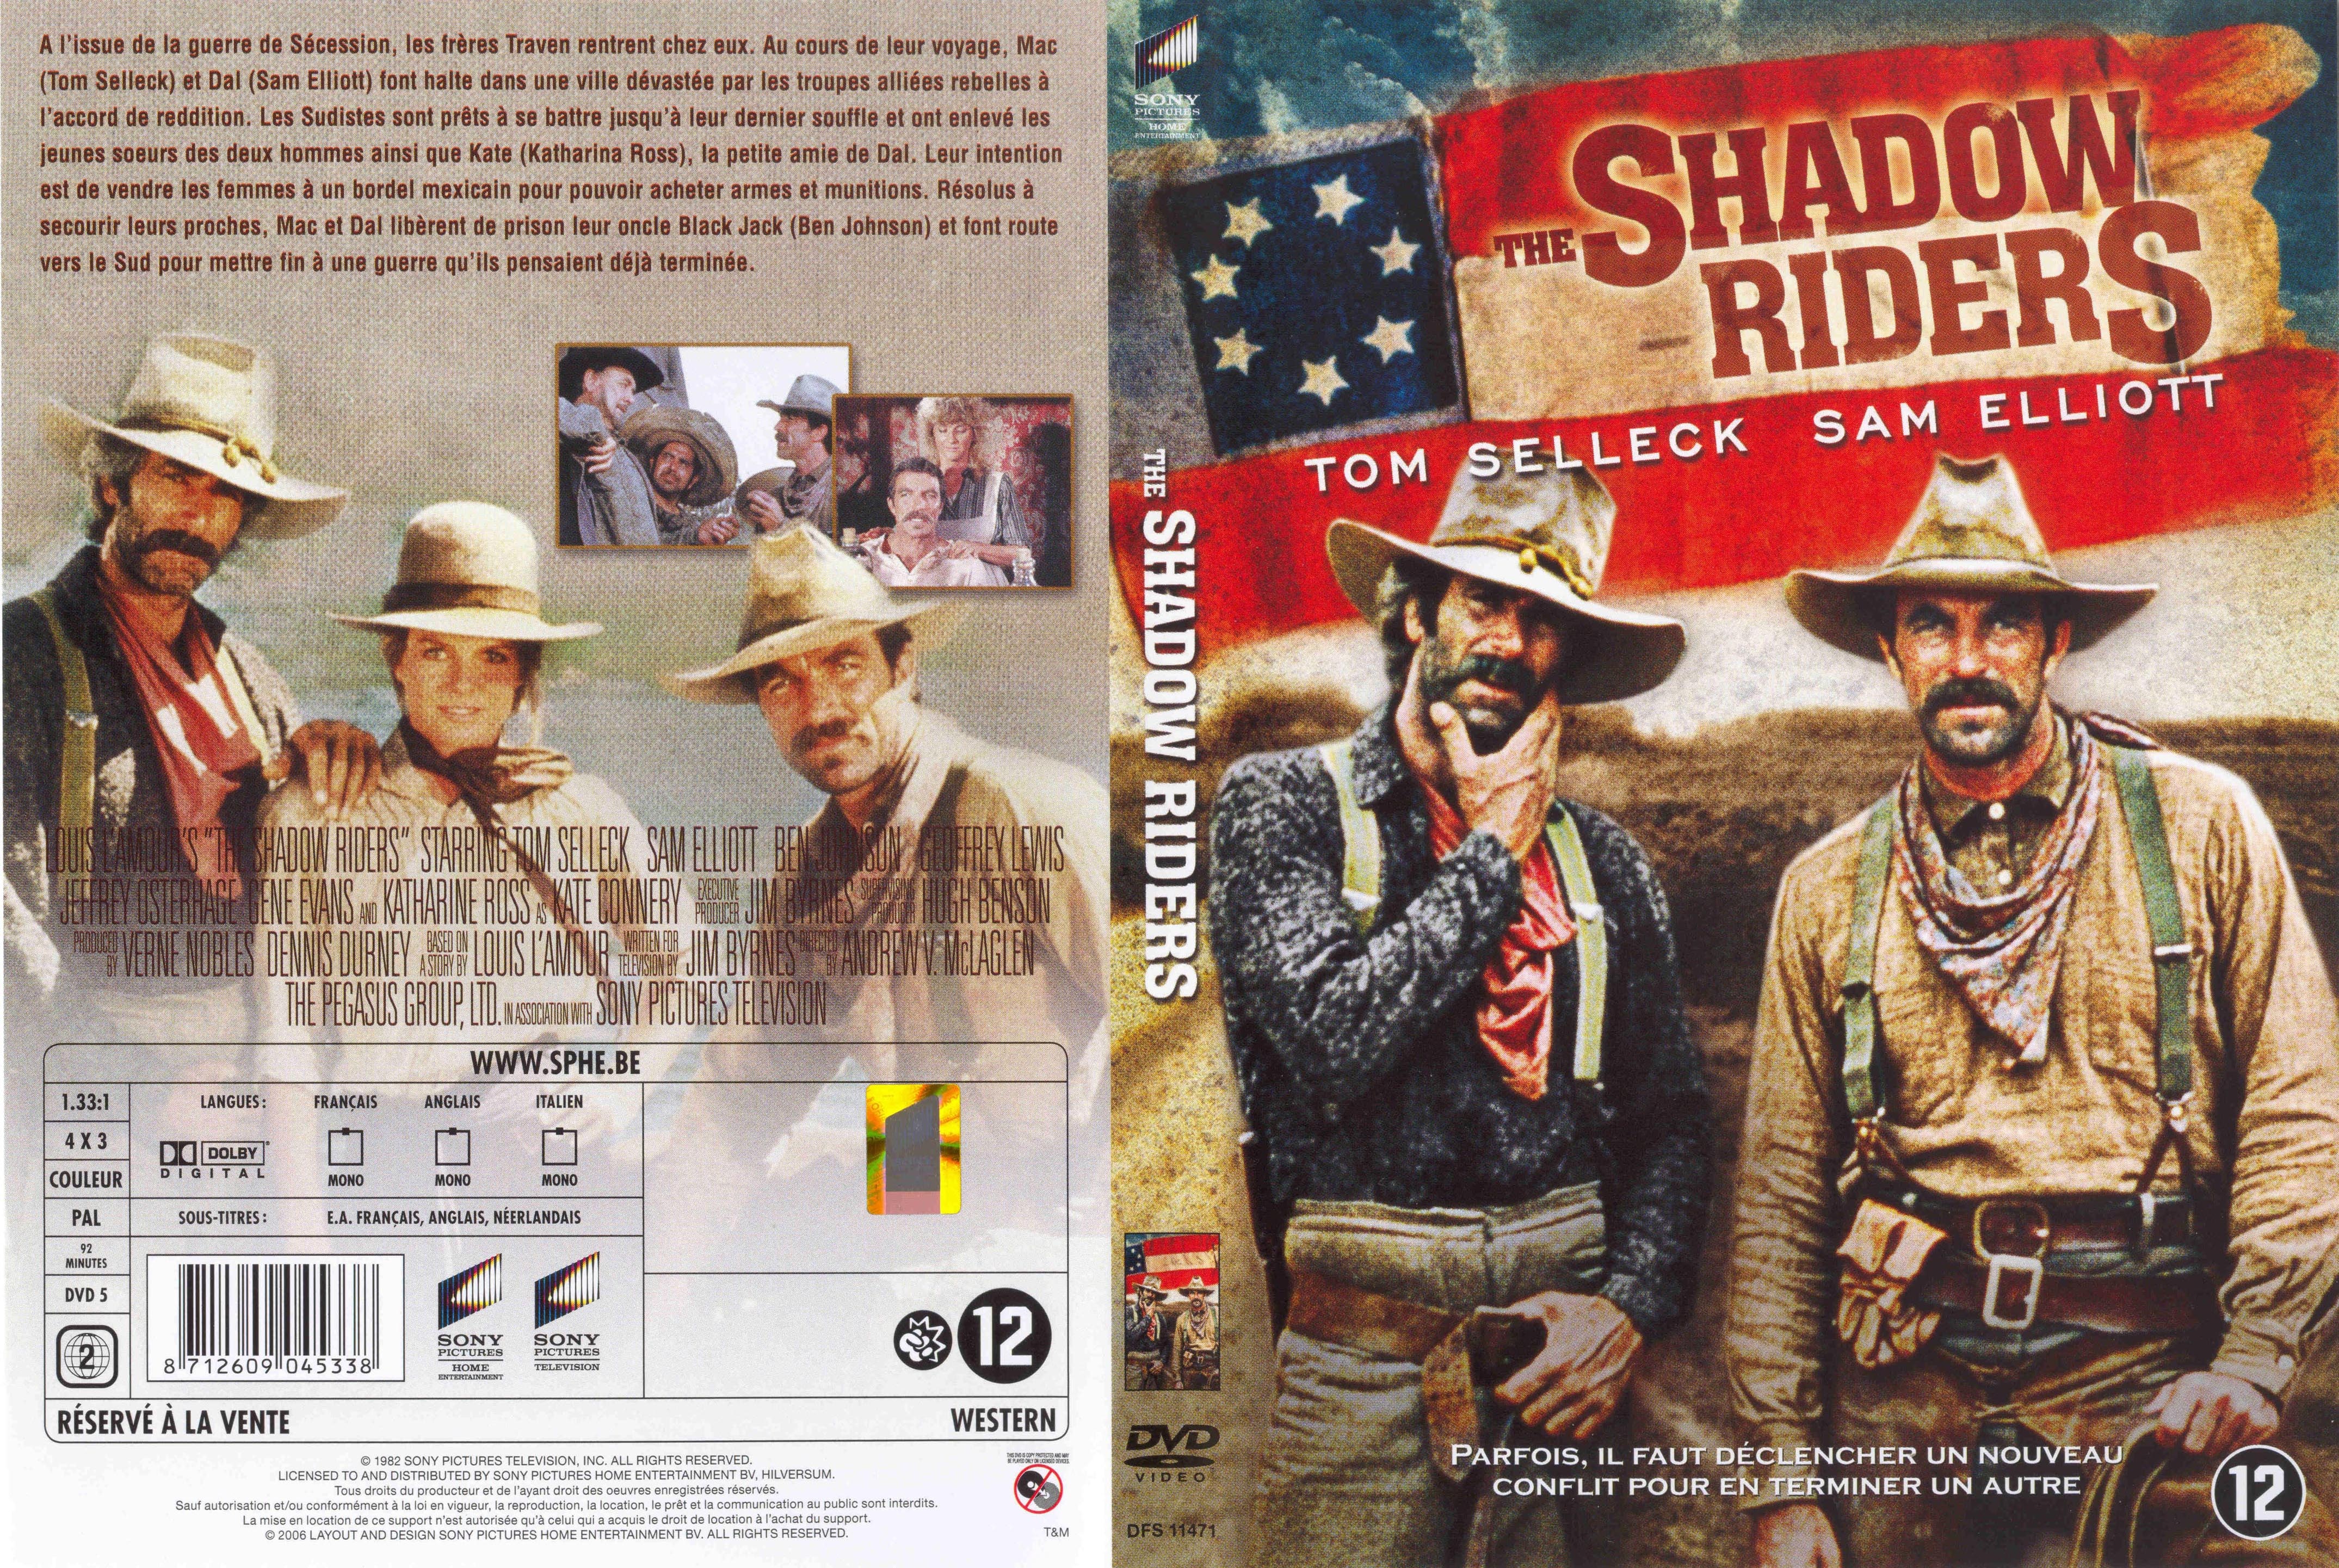 Jaquette DVD The shadow riders v2